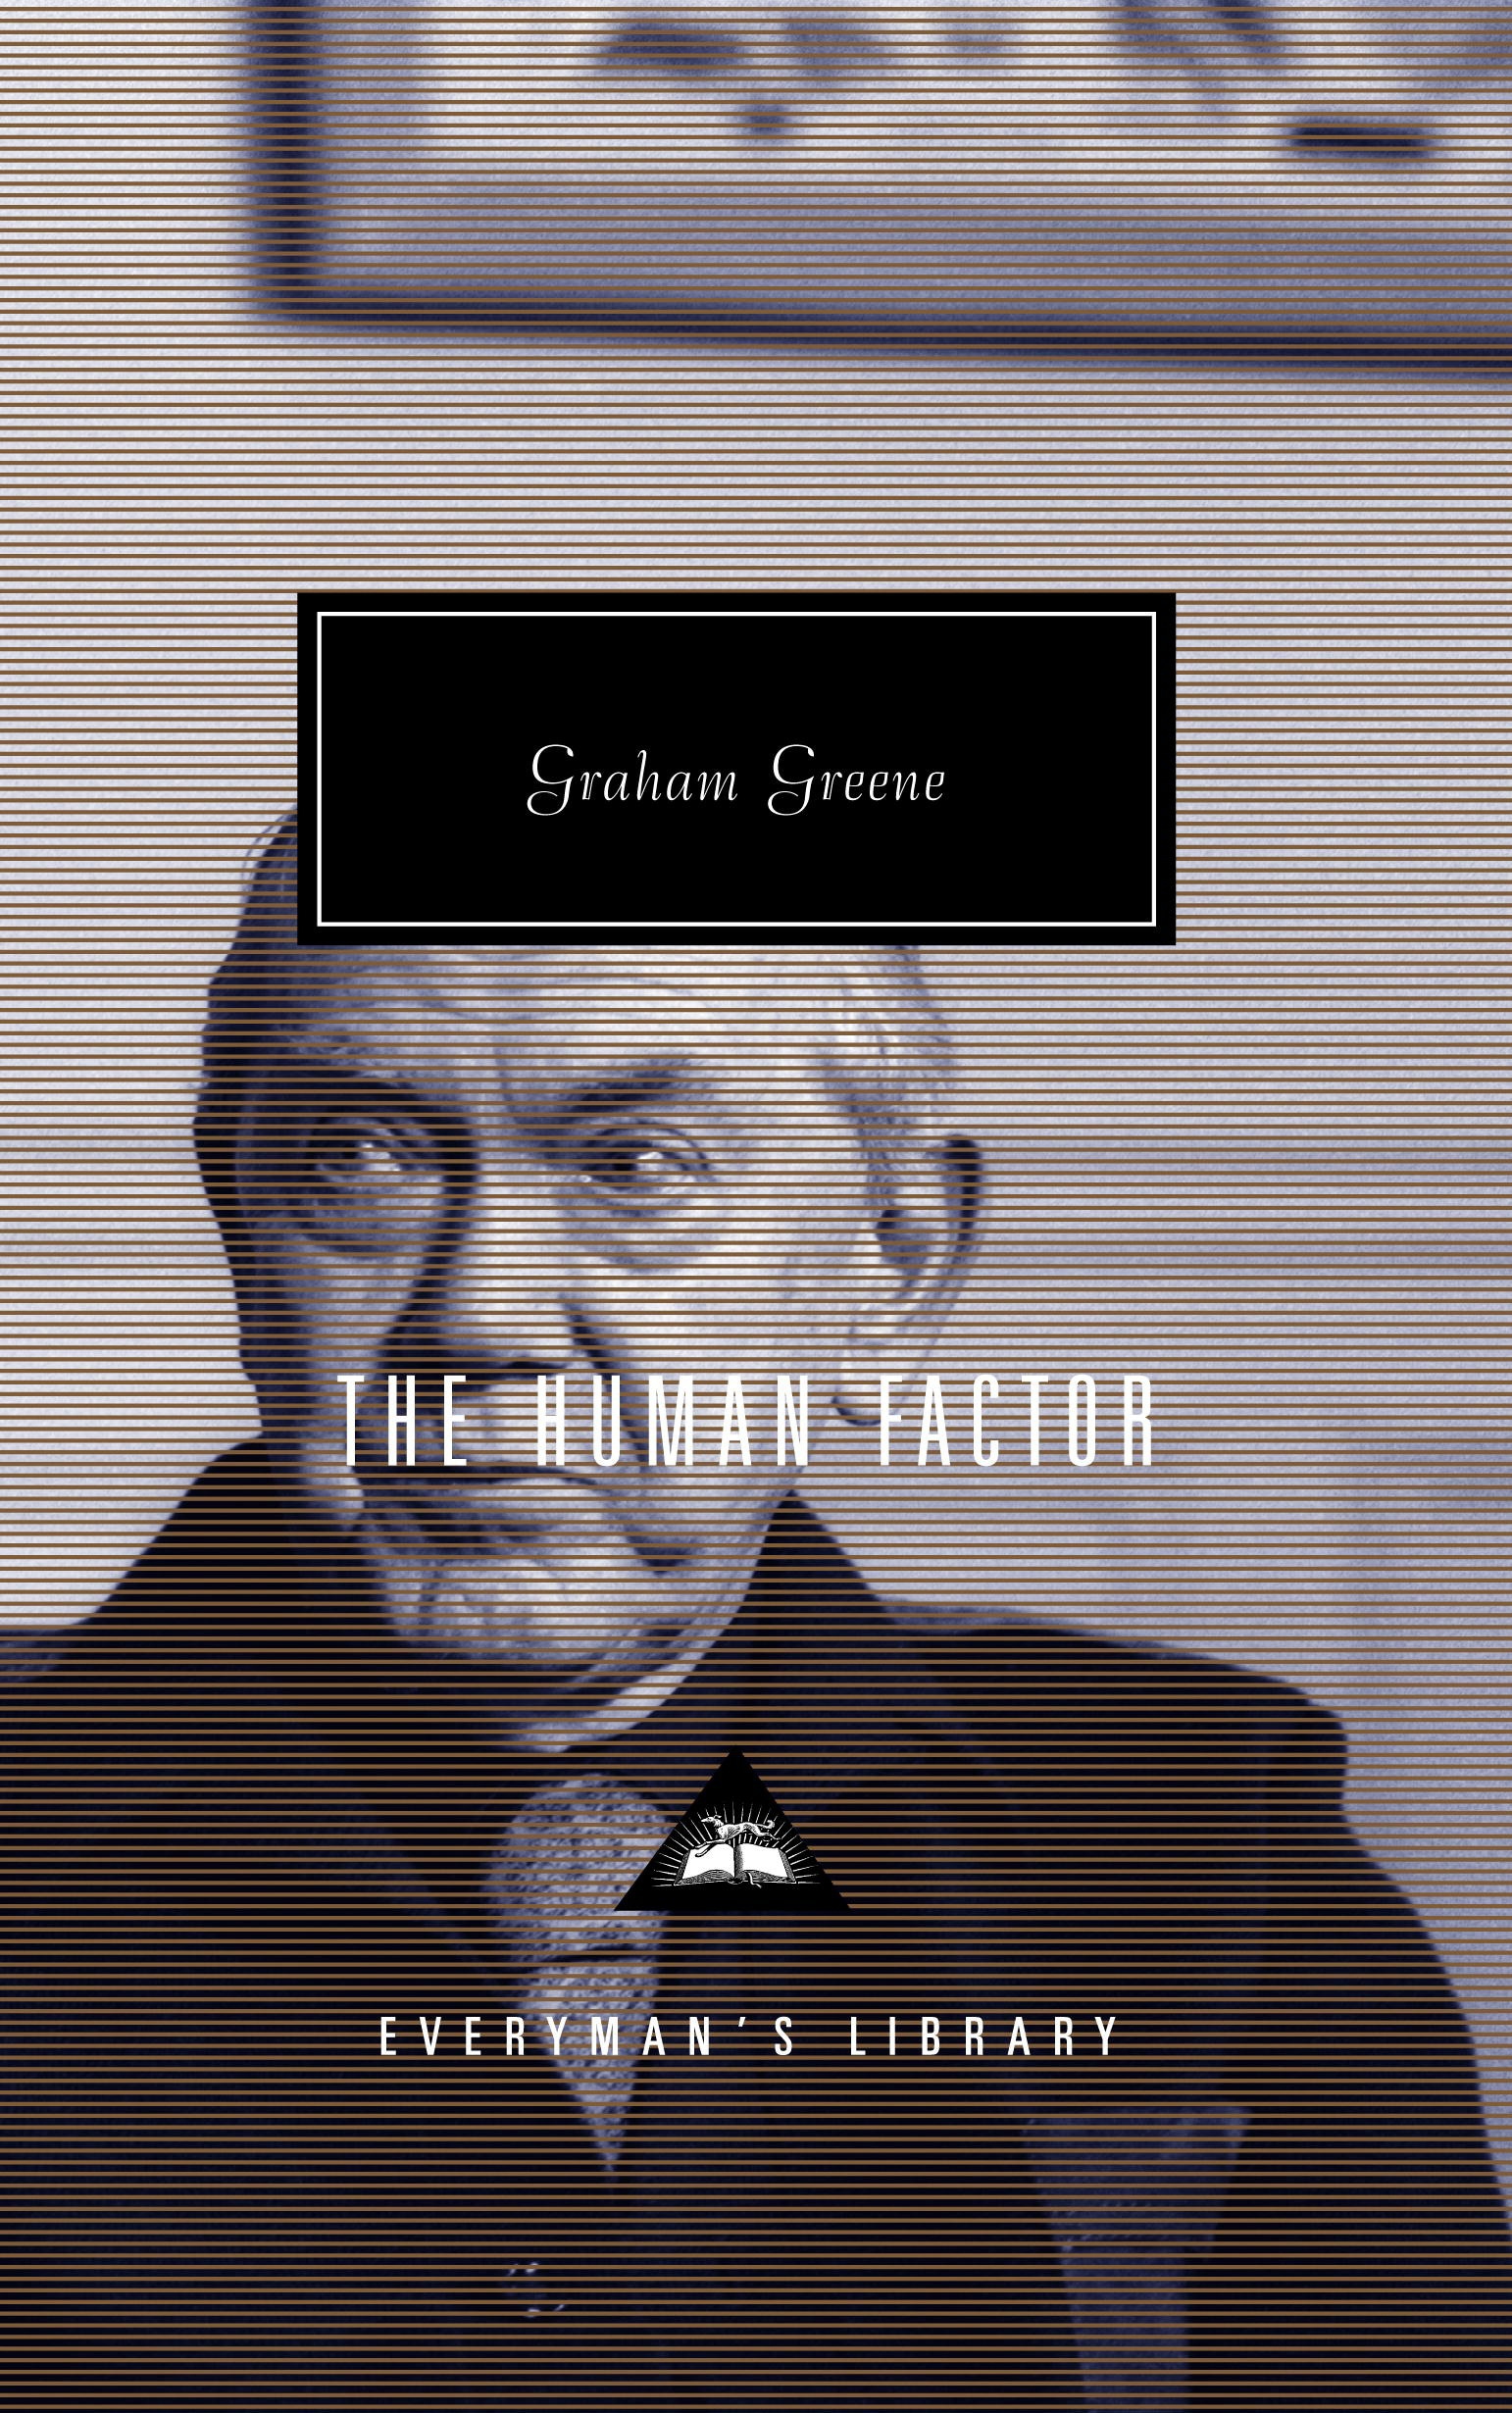 Book “The Human Factor” by Graham Greene — March 19, 1992